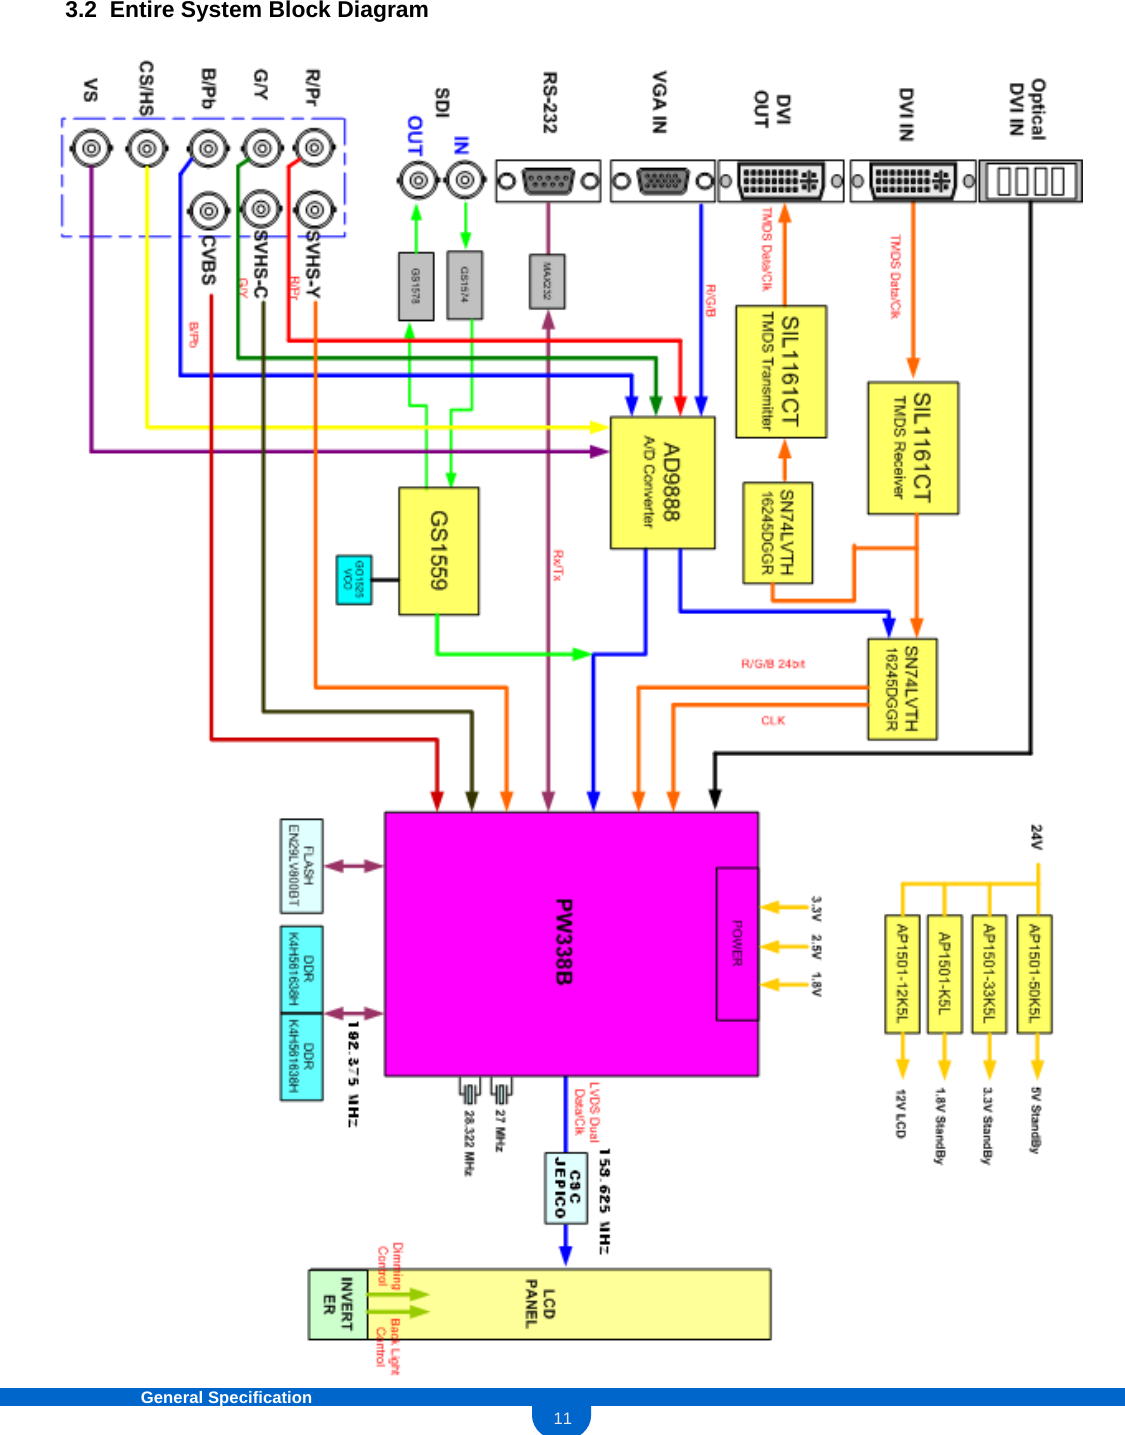 11General Specification 3.2  Entire System Block Diagram 